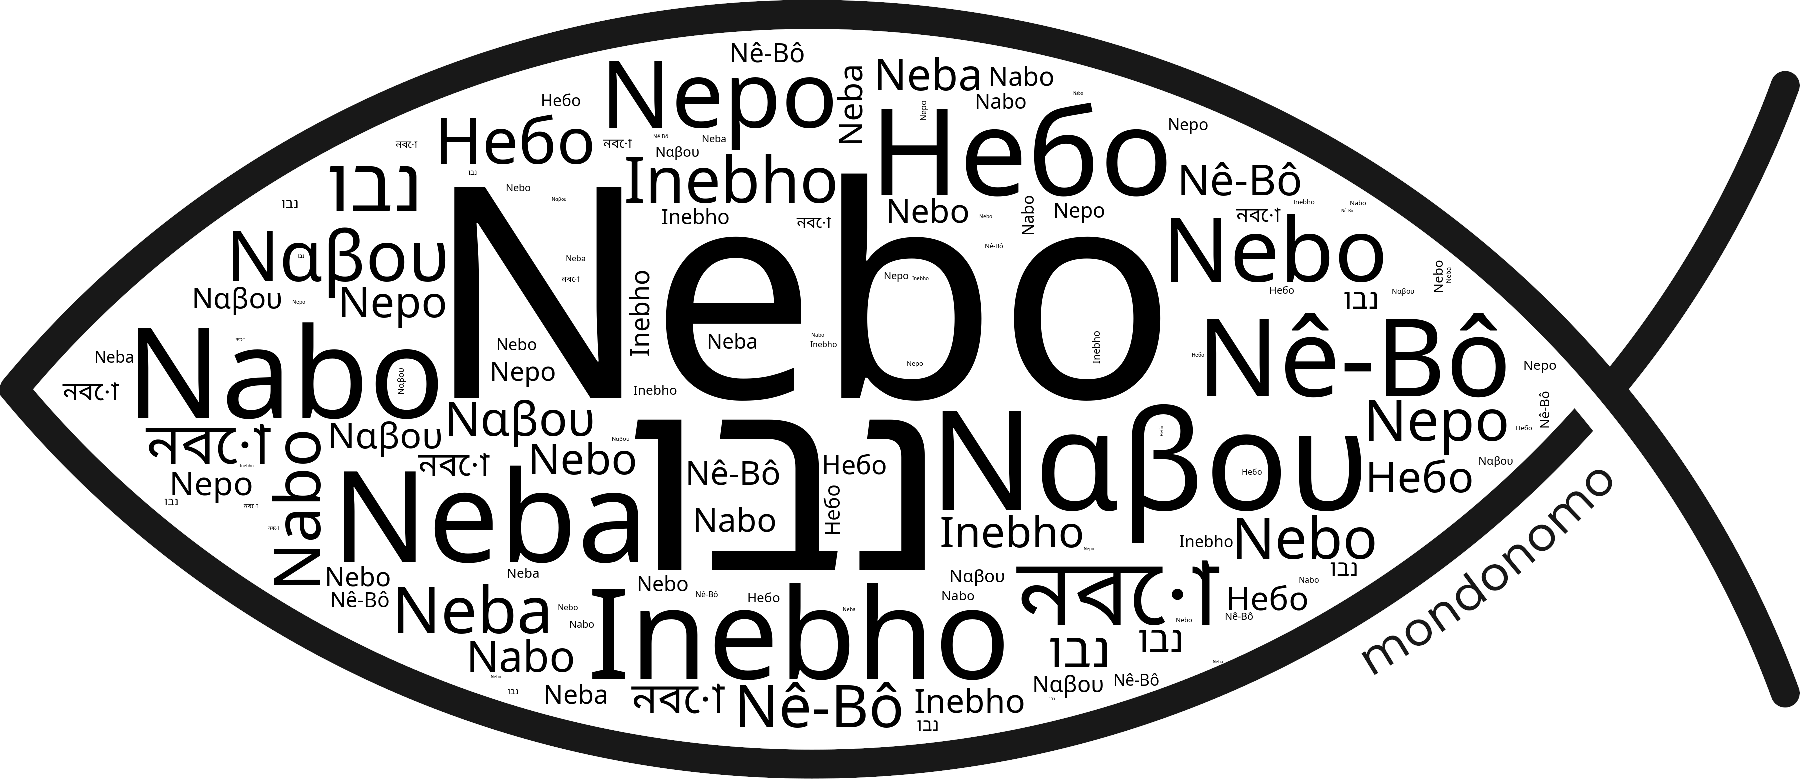 Name Nebo in the world's Bibles